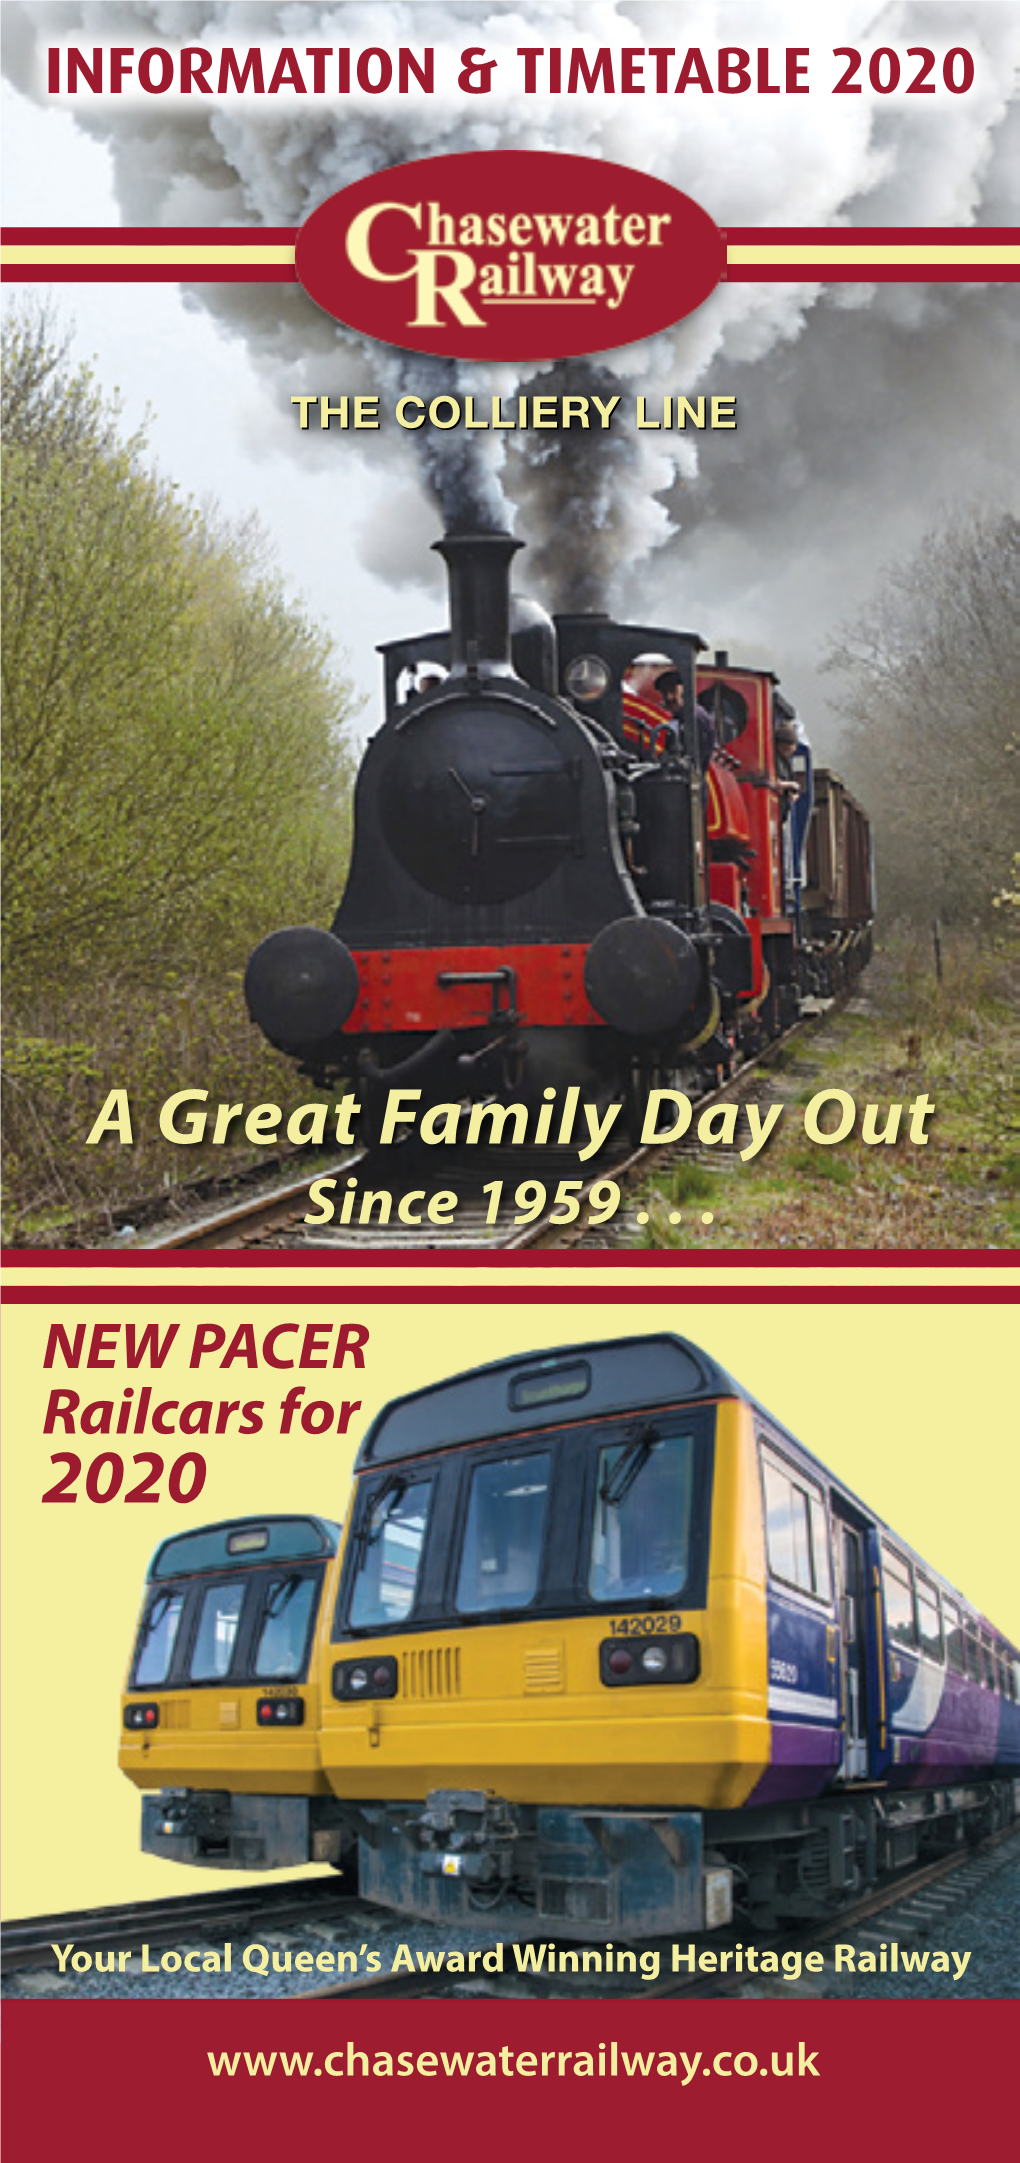 A Great Family Day out Since 1959